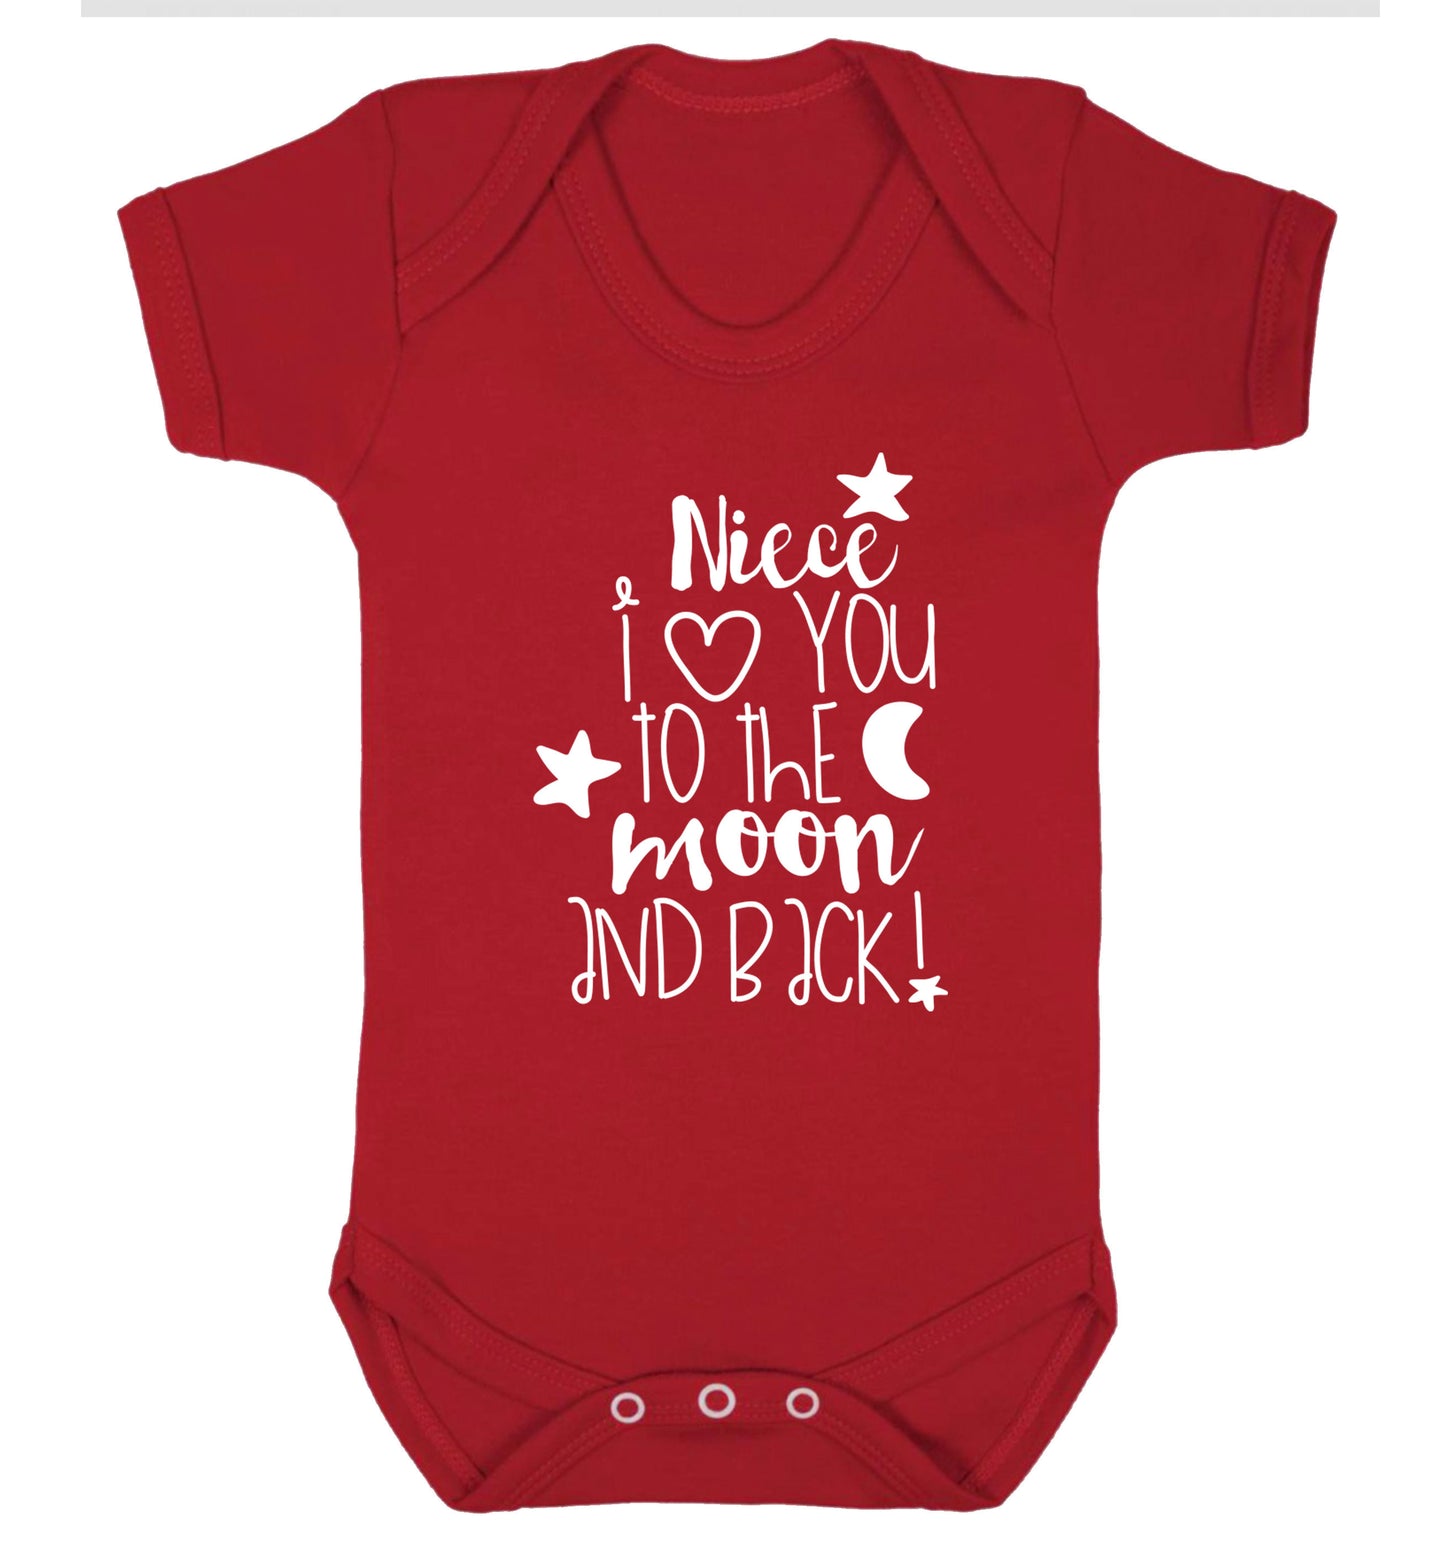 Niece I love you to the moon and back Baby Vest red 18-24 months